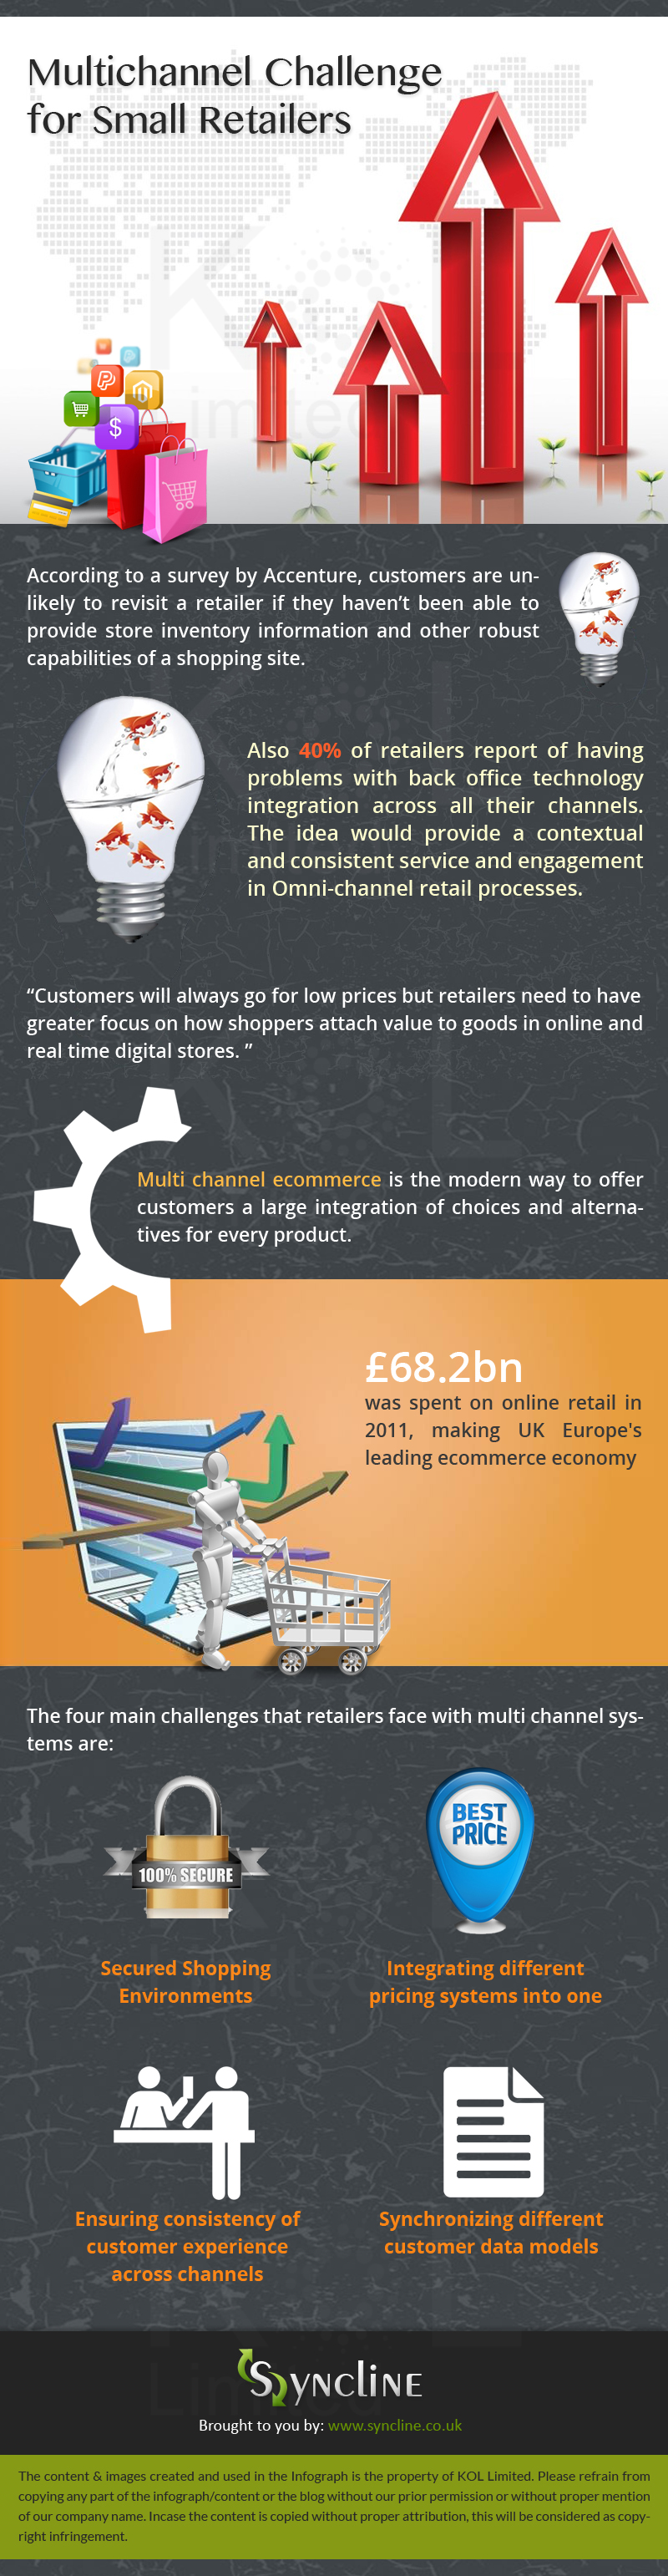 Multichannel Challanges For Small Retailers [Infographic]